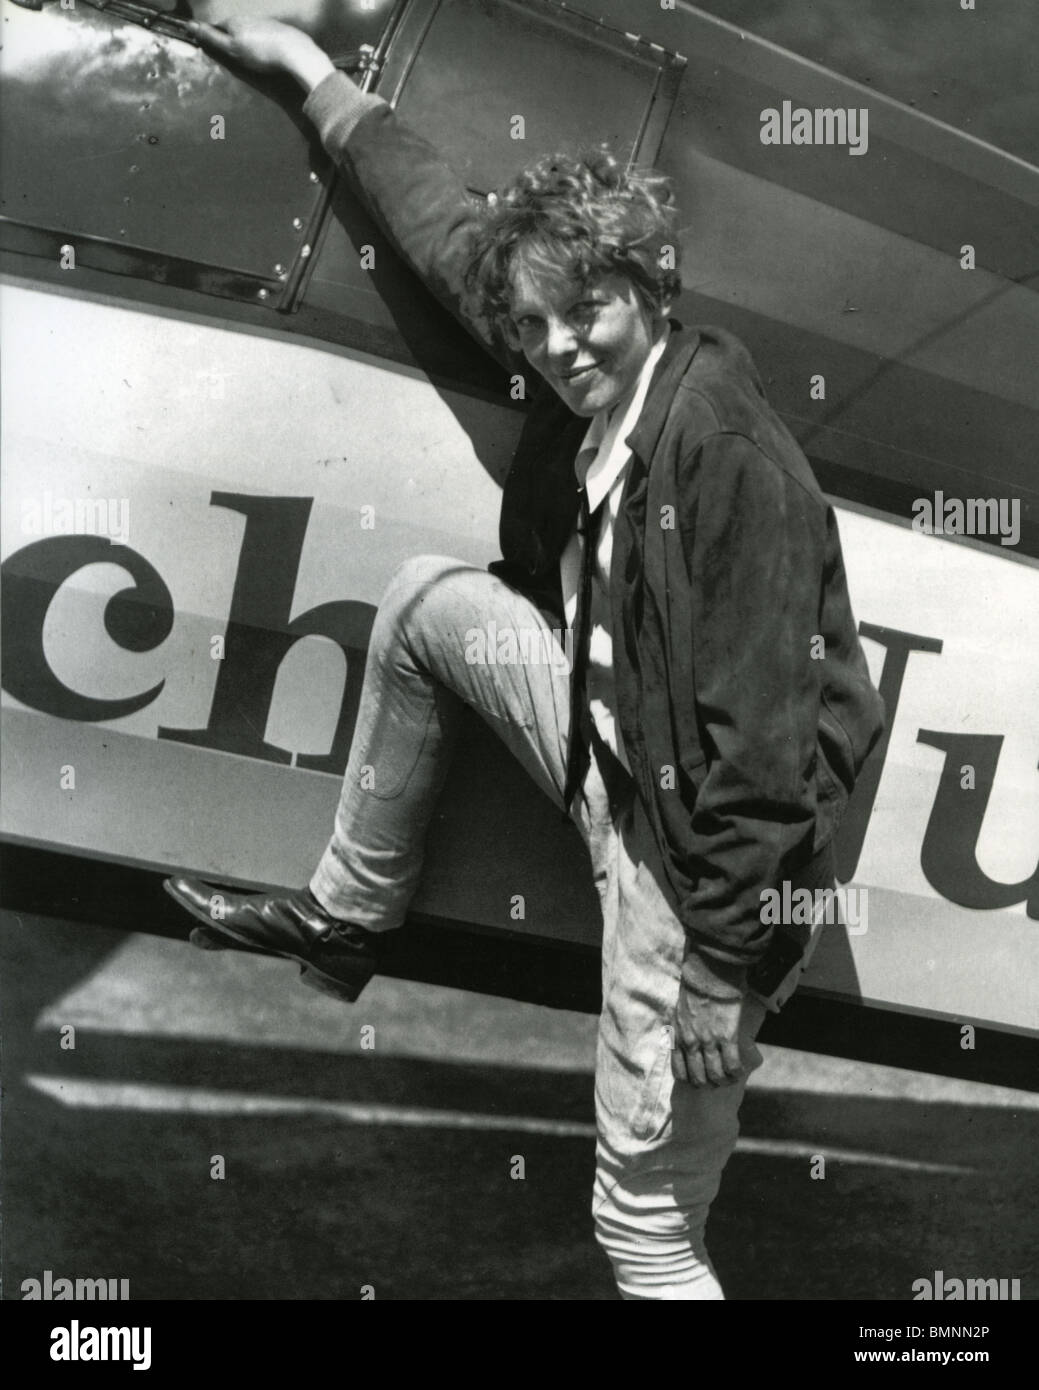 AMELIA EARHART - US aviator (1897-1937) Banque D'Images